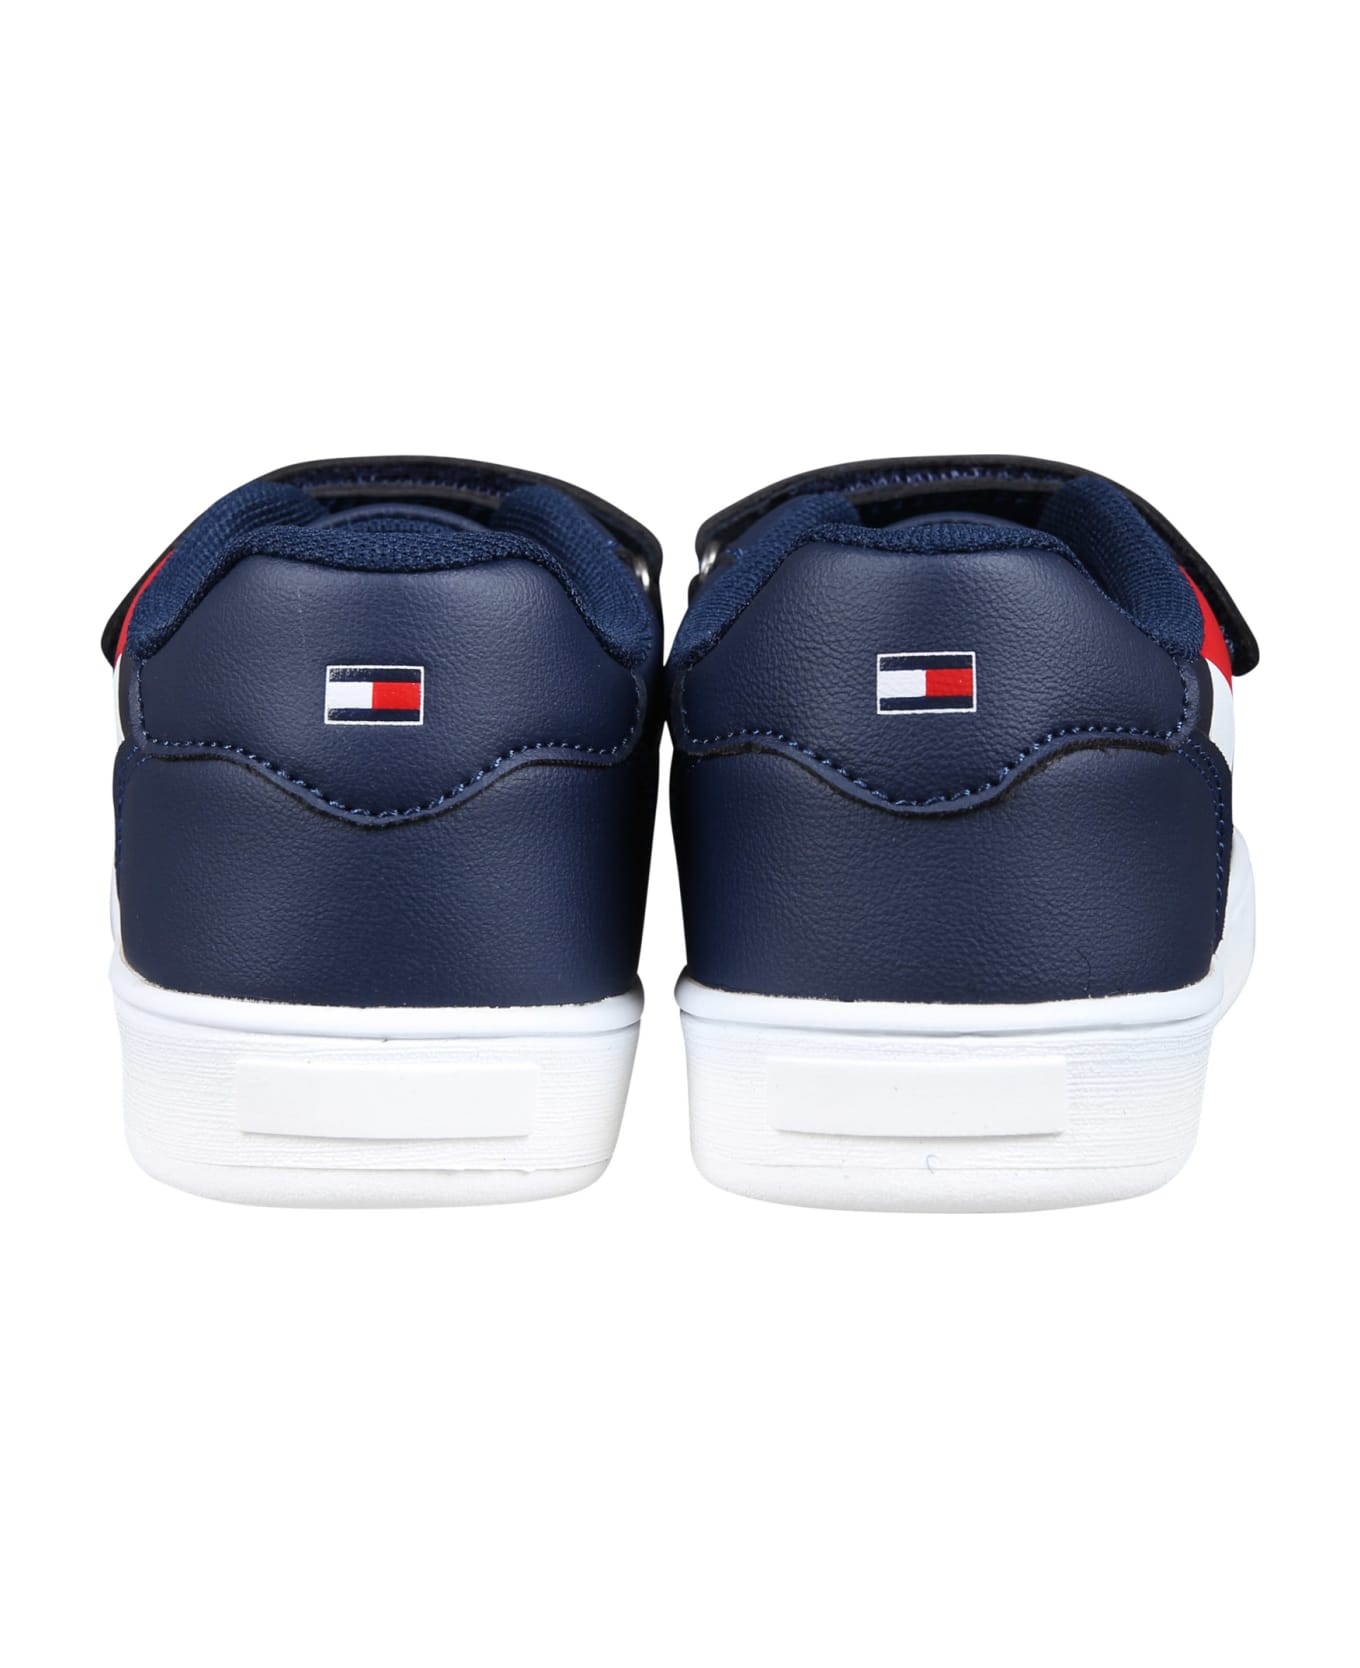 Tommy Hilfiger Blue Sneakers For Kids With Flag And Logo - Blue シューズ